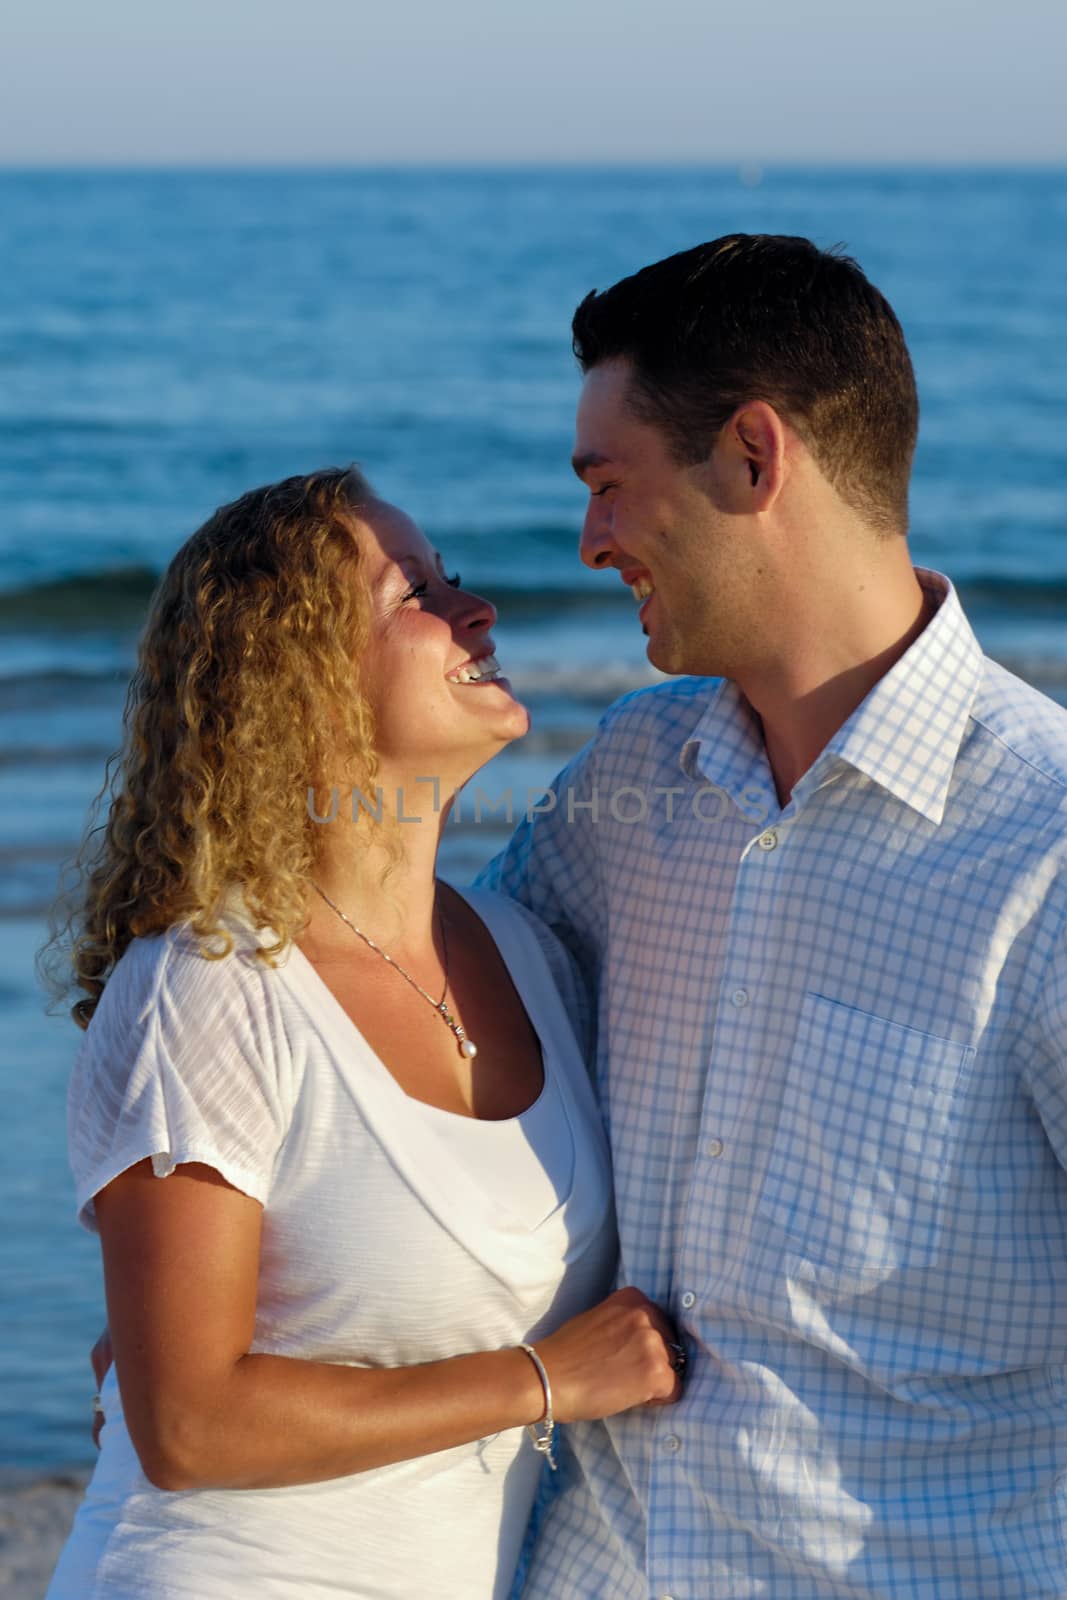 A happy woman and man in love at beach.